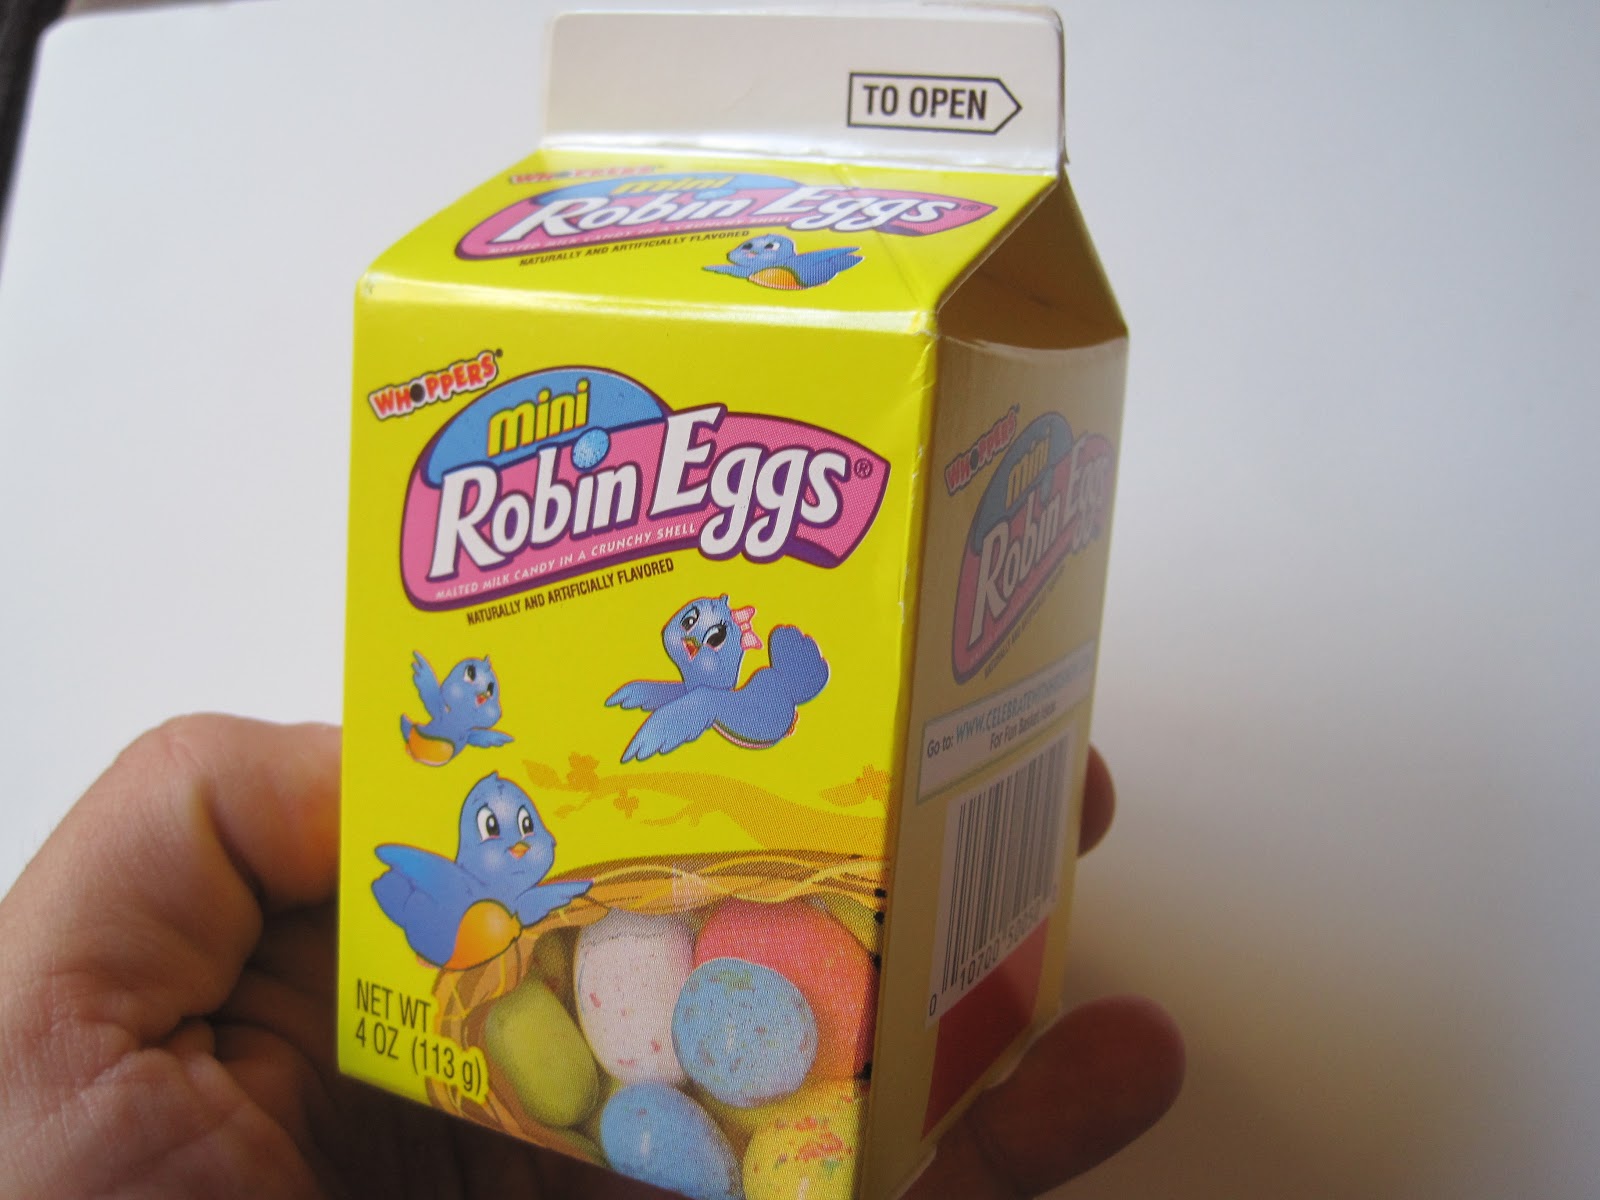 Walking The Candy Aisle: Whoppers Mini Robin Eggs review